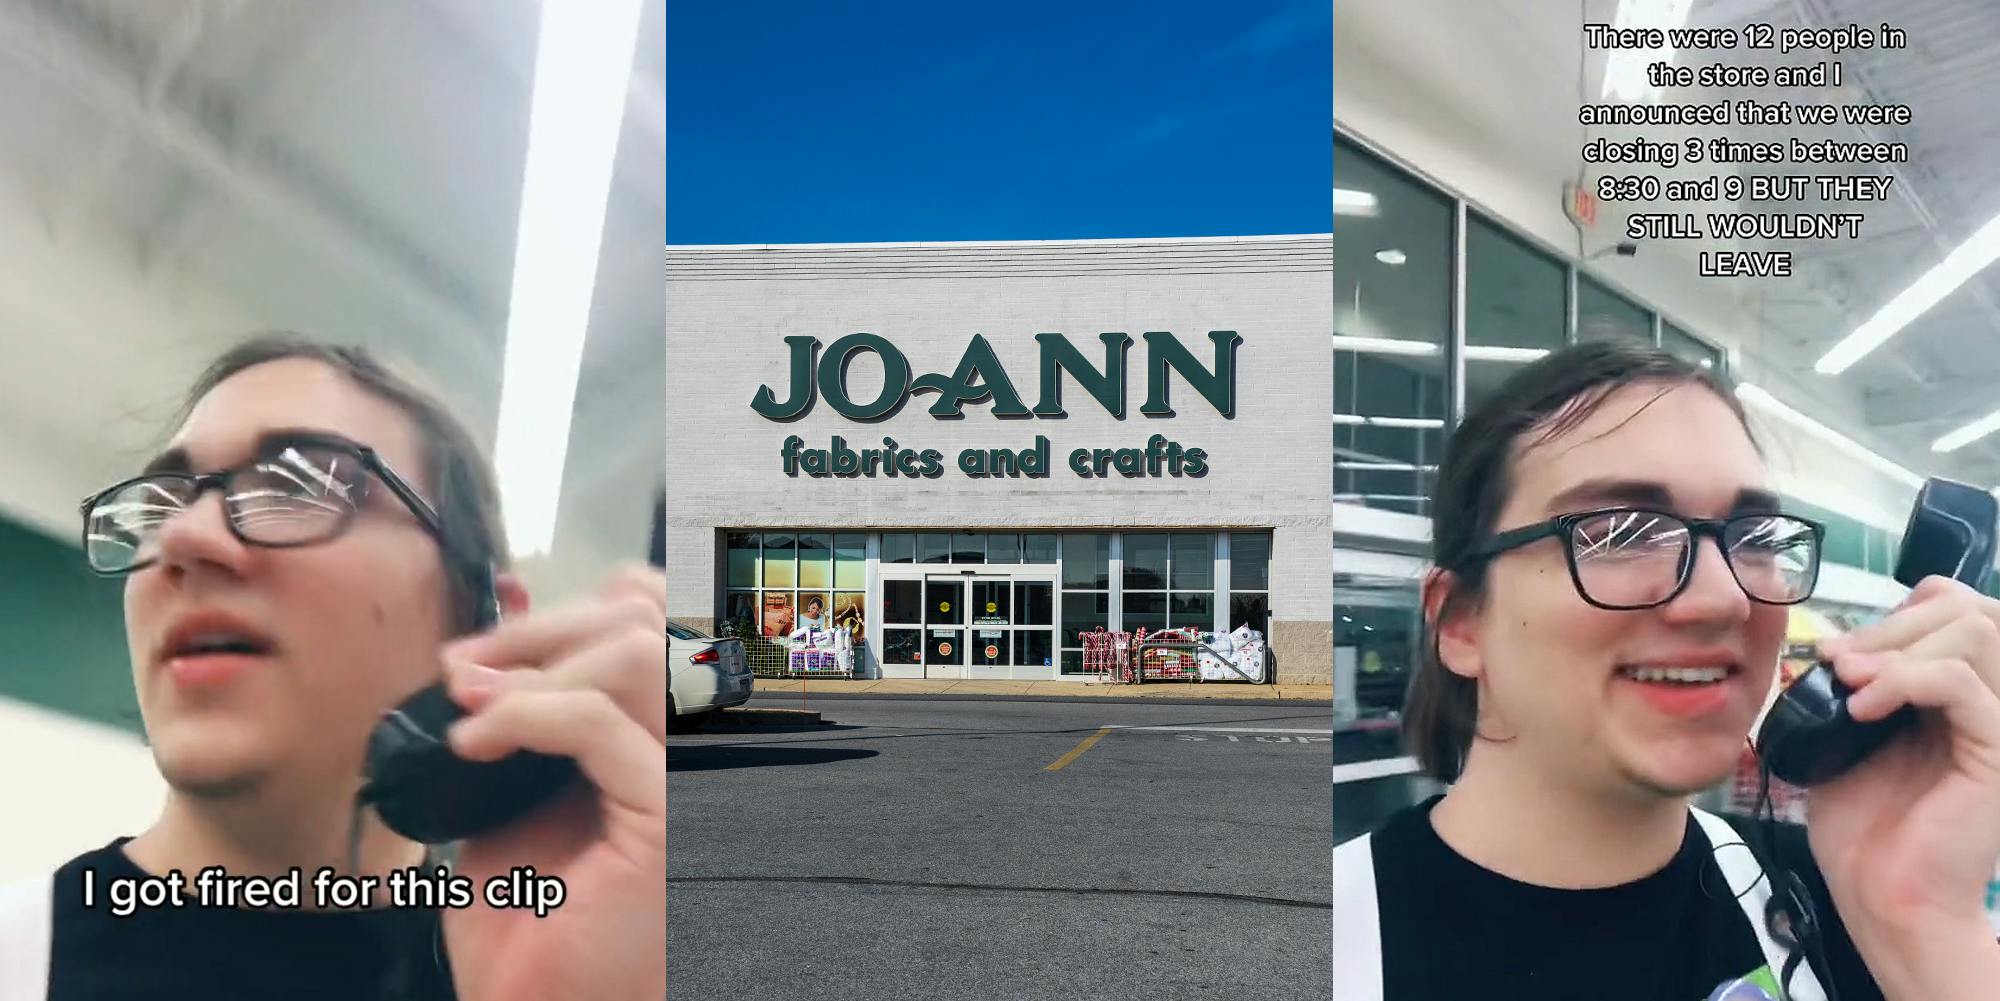 Joann Fabric's employee speaking on store intercom caption "I got fired for this clip" (l) Joann Fabric's building with sign and parking lot (c) Joann Fabric's employee speaking on store intercom caption "There were 12 people in the store and I announced that we were closing 3 times between 8:30 and 9 BUT THEY STILL WOULDN'T LEAVE" (r)